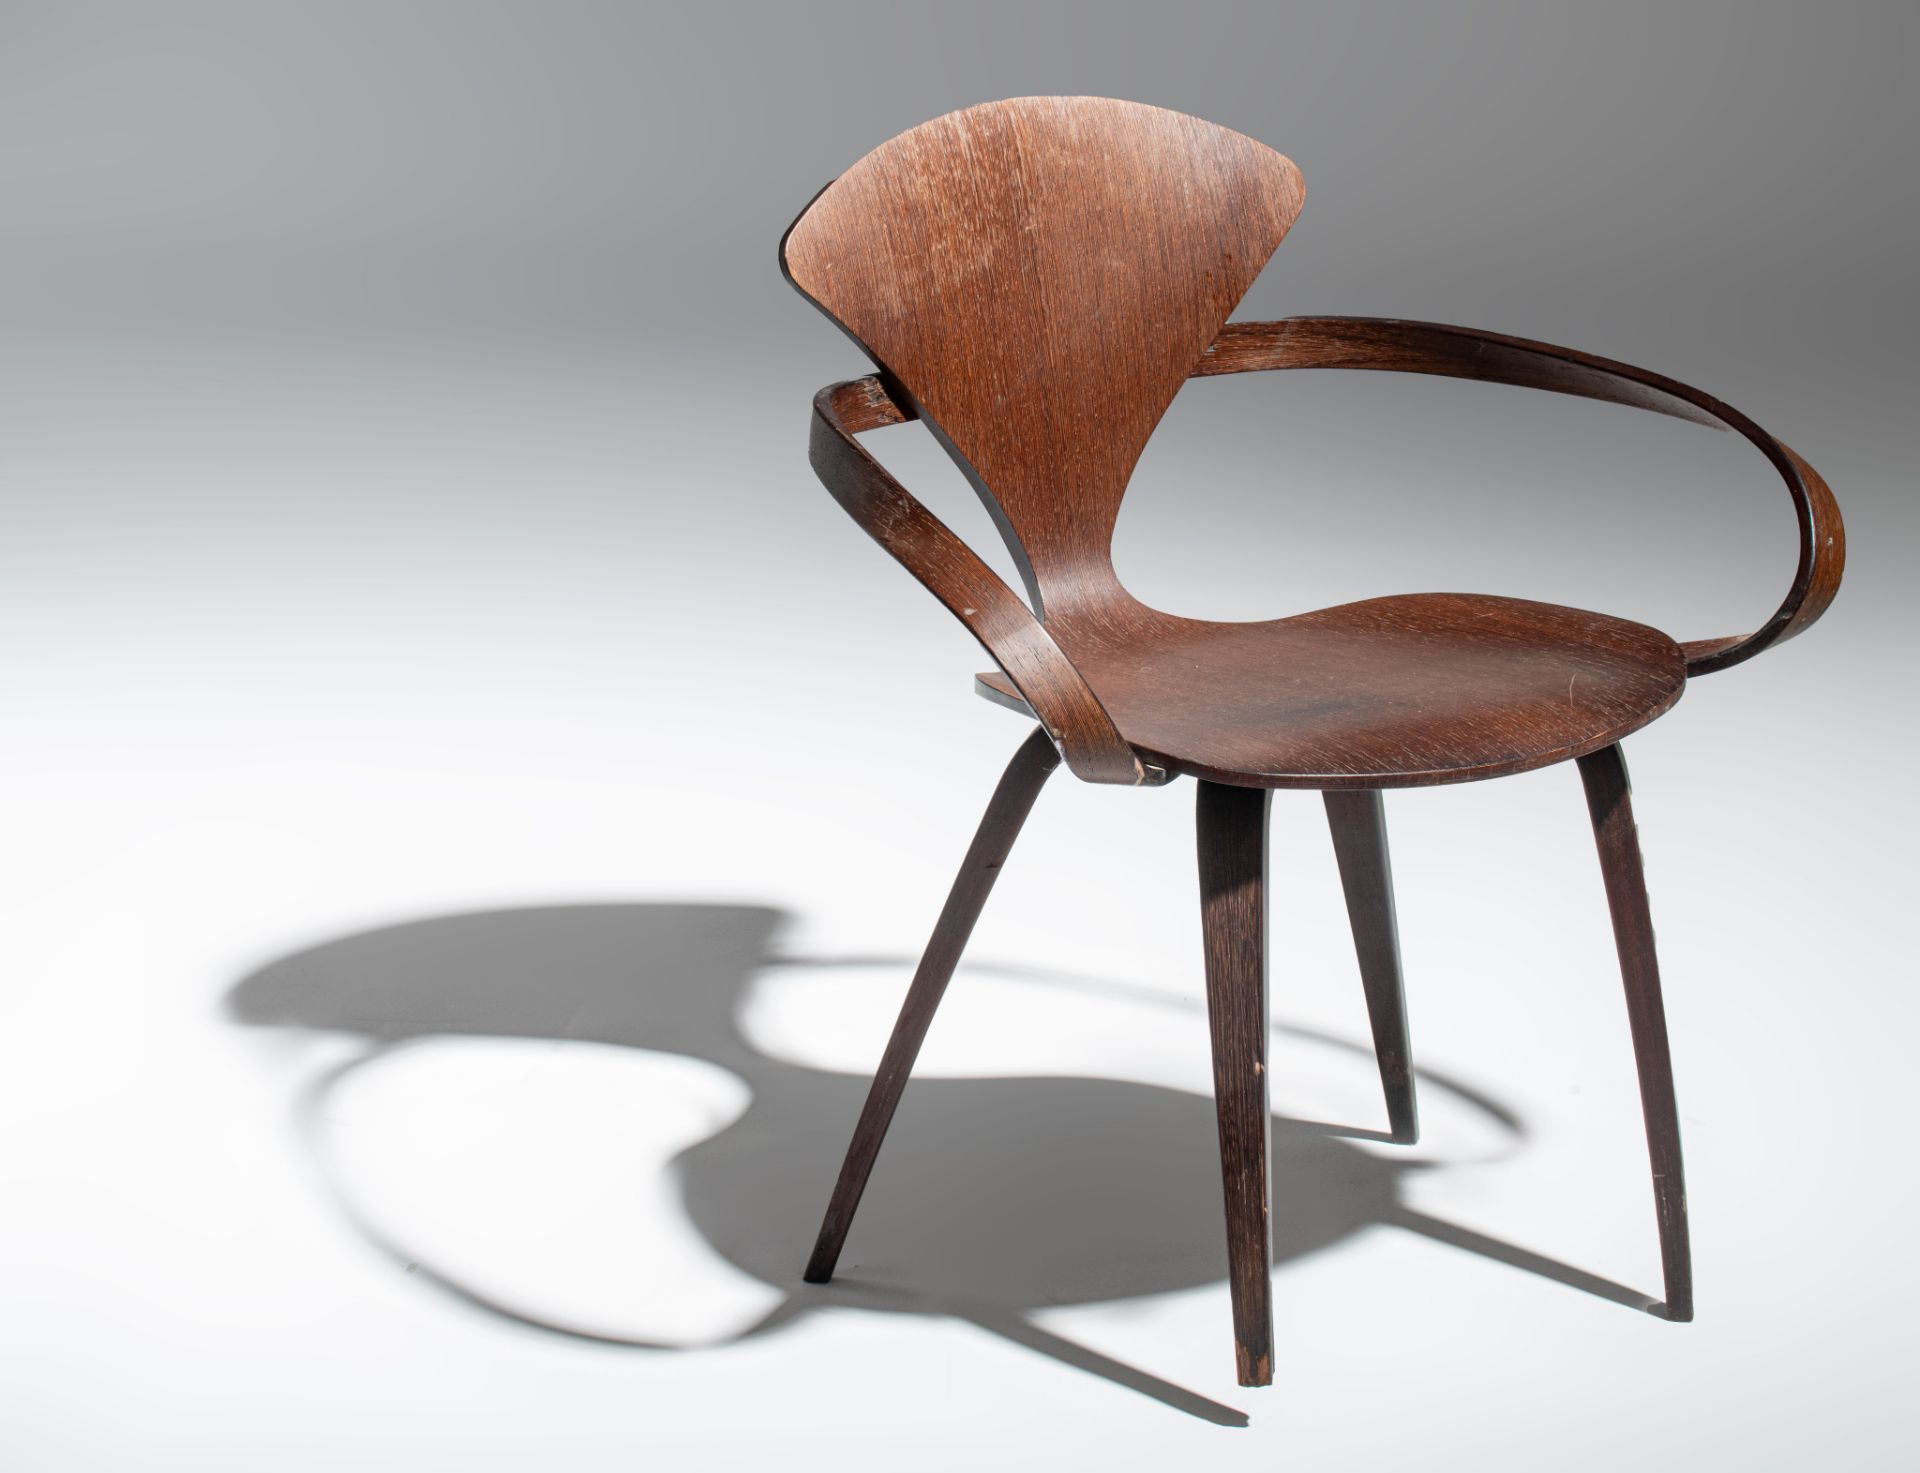 A vintage rosewood Pretzel chair by George Nelson, H 79,5 - W 67 cm - Image 2 of 13